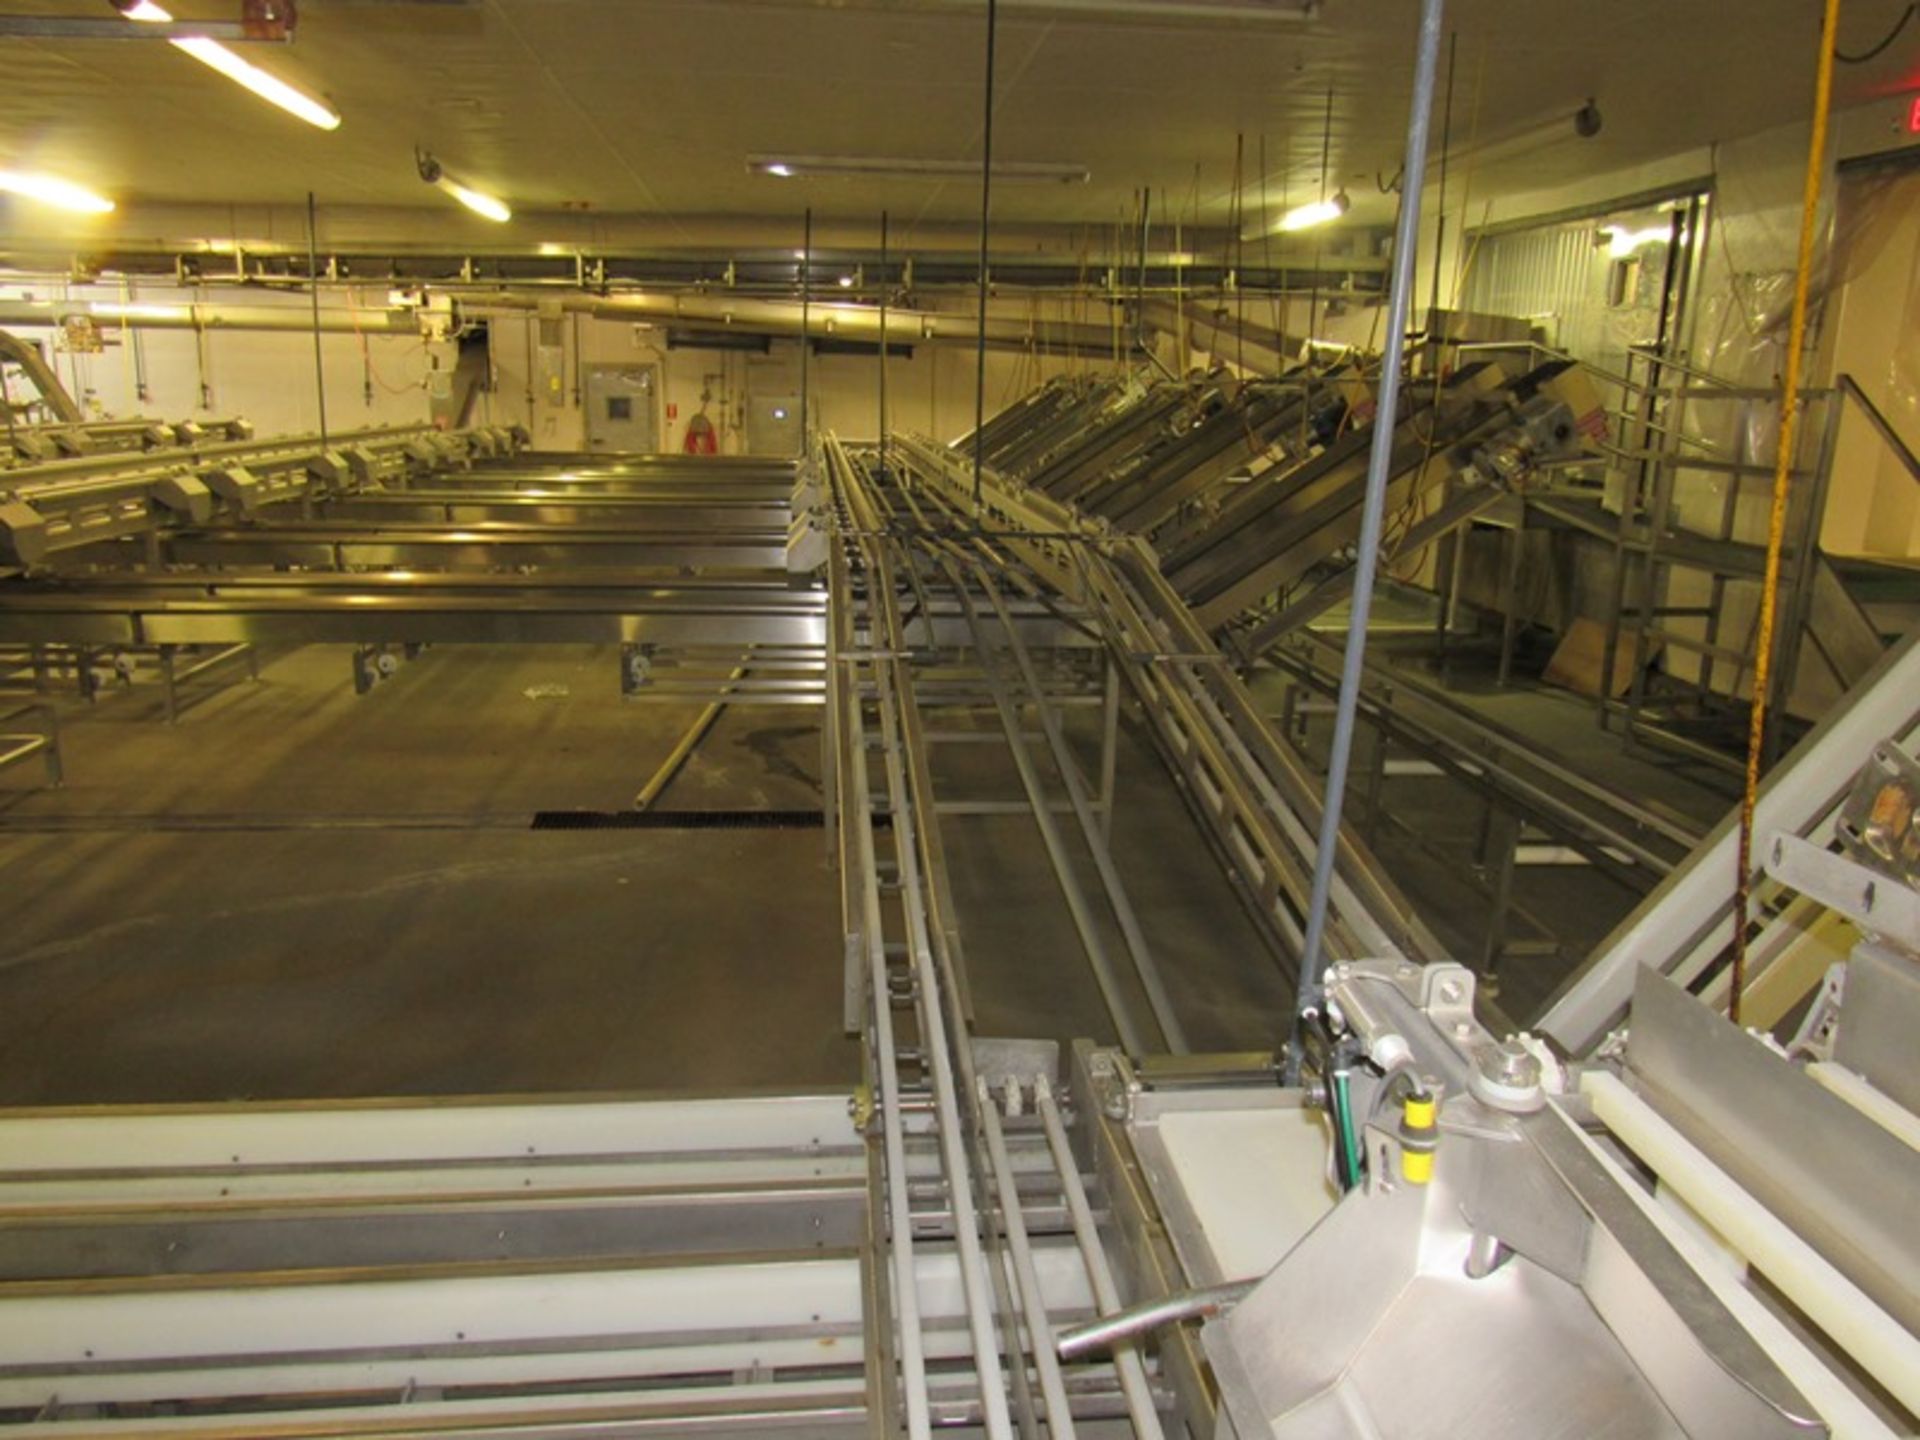 C.A.T. Stainless Steel Grading Line, dual lanes, 10 positions per lane, pneumatic drop chutes, - Image 7 of 18